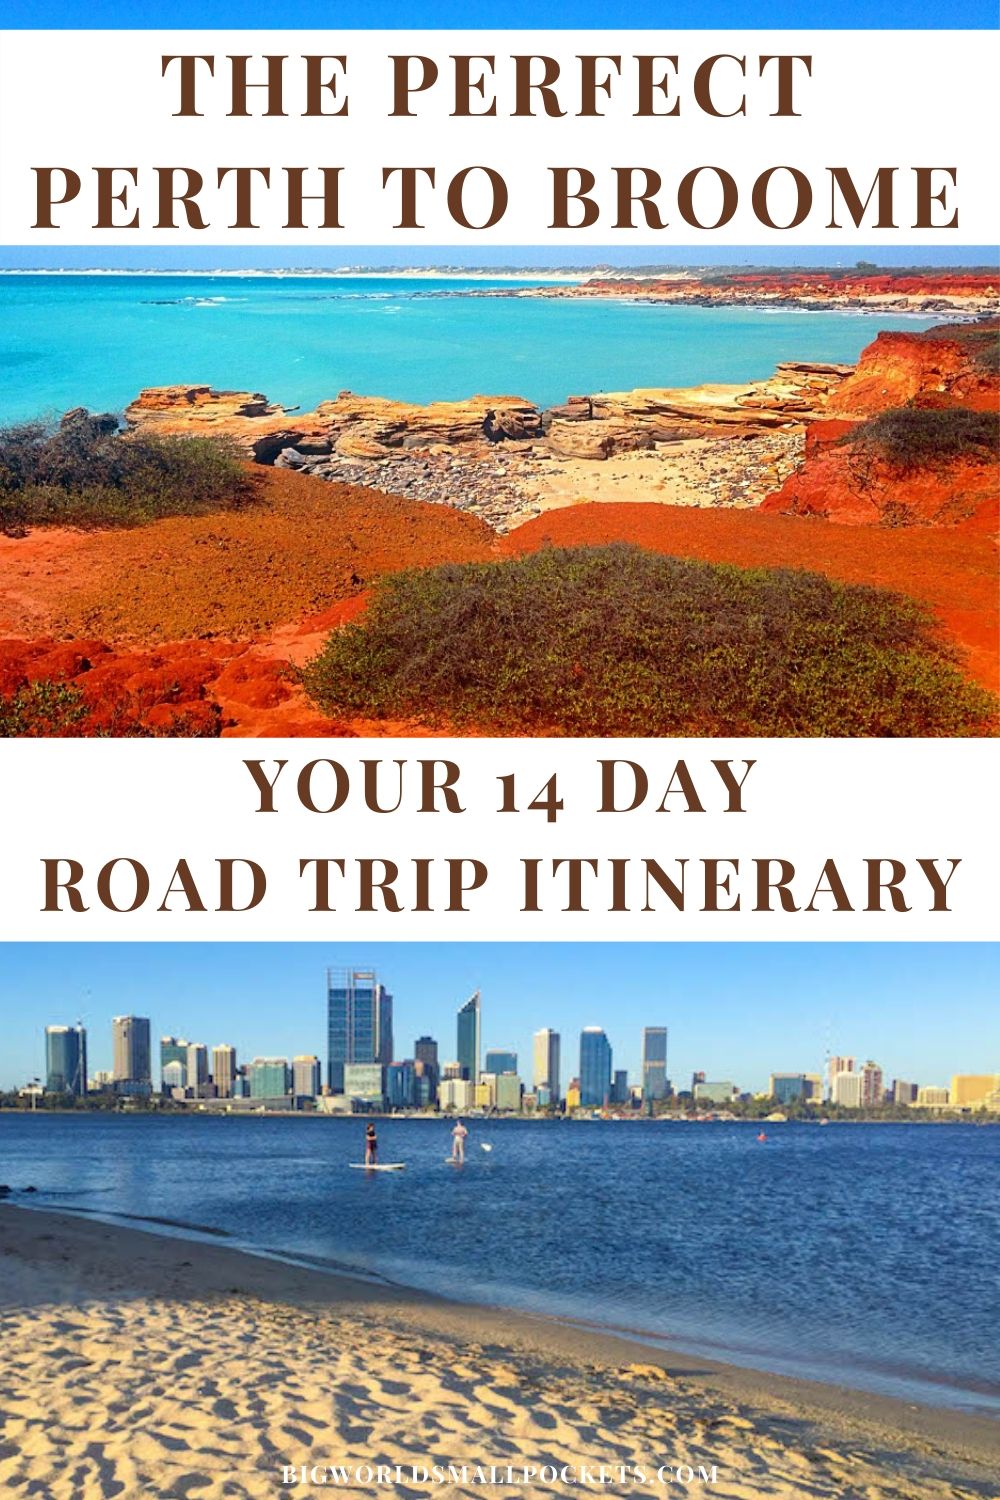 The Perfect Perth to Broome Road Trip Itinerary